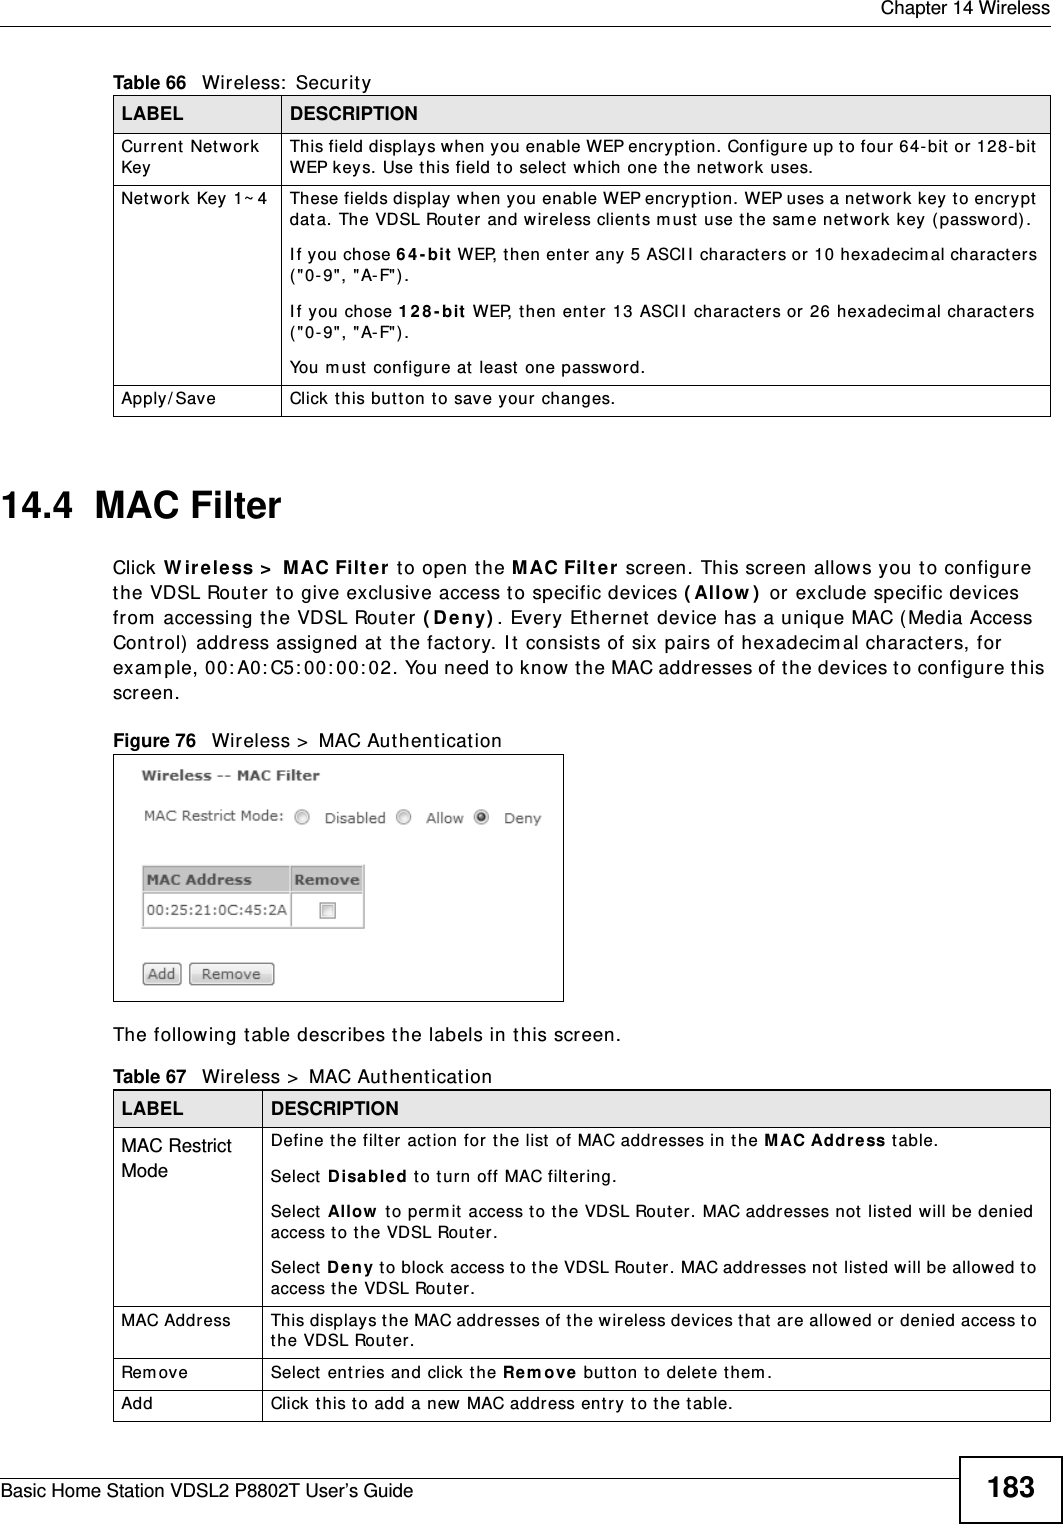  Chapter 14 WirelessBasic Home Station VDSL2 P8802T User’s Guide 18314.4  MAC Filter    Click W ireless &gt;  MAC Filt er to open t he M AC Filt er  screen. This screen allows you t o configure the VDSL Router  to give exclusive access t o specific devices ( Allow )  or exclude specific devices from  accessing t he VDSL Router ( De ny) . Every Ether net  device has a unique MAC (Media Access Cont rol) address assigned at  t he fact ory. I t  consist s of six pairs of hexadecim al charact ers, for exam ple, 00: A0: C5: 00: 00: 02. You need to know t he MAC addresses of t he devices to configure this screen.Figure 76   Wireless &gt;  MAC Authent icat ionThe following t able describes t he labels in t his screen.Cur rent  Networ k KeyThis field displays when you enable WEP encryption. Configure up t o four 64-bit  or 128-bit  WEP keys. Use this field t o select  w hich one the net work uses. Network Key 1~ 4 These fields display when you enable WEP encryption. WEP uses a net work key t o encrypt dat a. The VDSL Rout er and wireless client s m ust  use the sam e net work  key ( password) .I f you chose 6 4 - bit  WEP,  t hen ent er  any 5 ASCI I  charact ers or 10 hexadecim al charact er s ( &quot;0-9&quot;, &quot;A- F&quot;) .I f you chose 1 2 8- bit WEP, t hen enter 13 ASCI I  charact er s or  26 hexadecim al charact er s ( &quot;0-9&quot;, &quot;A- F&quot;) . You m ust  configure at  least  one password. Apply/ Save Click this but ton to save your changes.Table 66   Wireless:  Securit yLABEL DESCRIPTIONTable 67   Wireless &gt;  MAC Aut hent icationLABEL DESCRIPTIONMAC Restrict Mode Define t he filter act ion for  t he list  of MAC addresses in the M AC Addr ess t able. Select  D isabled to t urn off MAC filt ering.Select  Allow  to perm it  access t o the VDSL Router. MAC addresses not listed will be denied access to t he VDSL Router. Select  De ny t o block access t o the VDSL Rout er. MAC addresses not list ed w ill be allowed to access the VDSL Rout er. MAC Address This displays the MAC addresses of the wir eless devices that are allowed or denied access to the VDSL Rout er.Rem ove Select  ent ries and click t he Rem ove  button t o delet e them . Add  Click this to add a new MAC address ent ry to the t able.